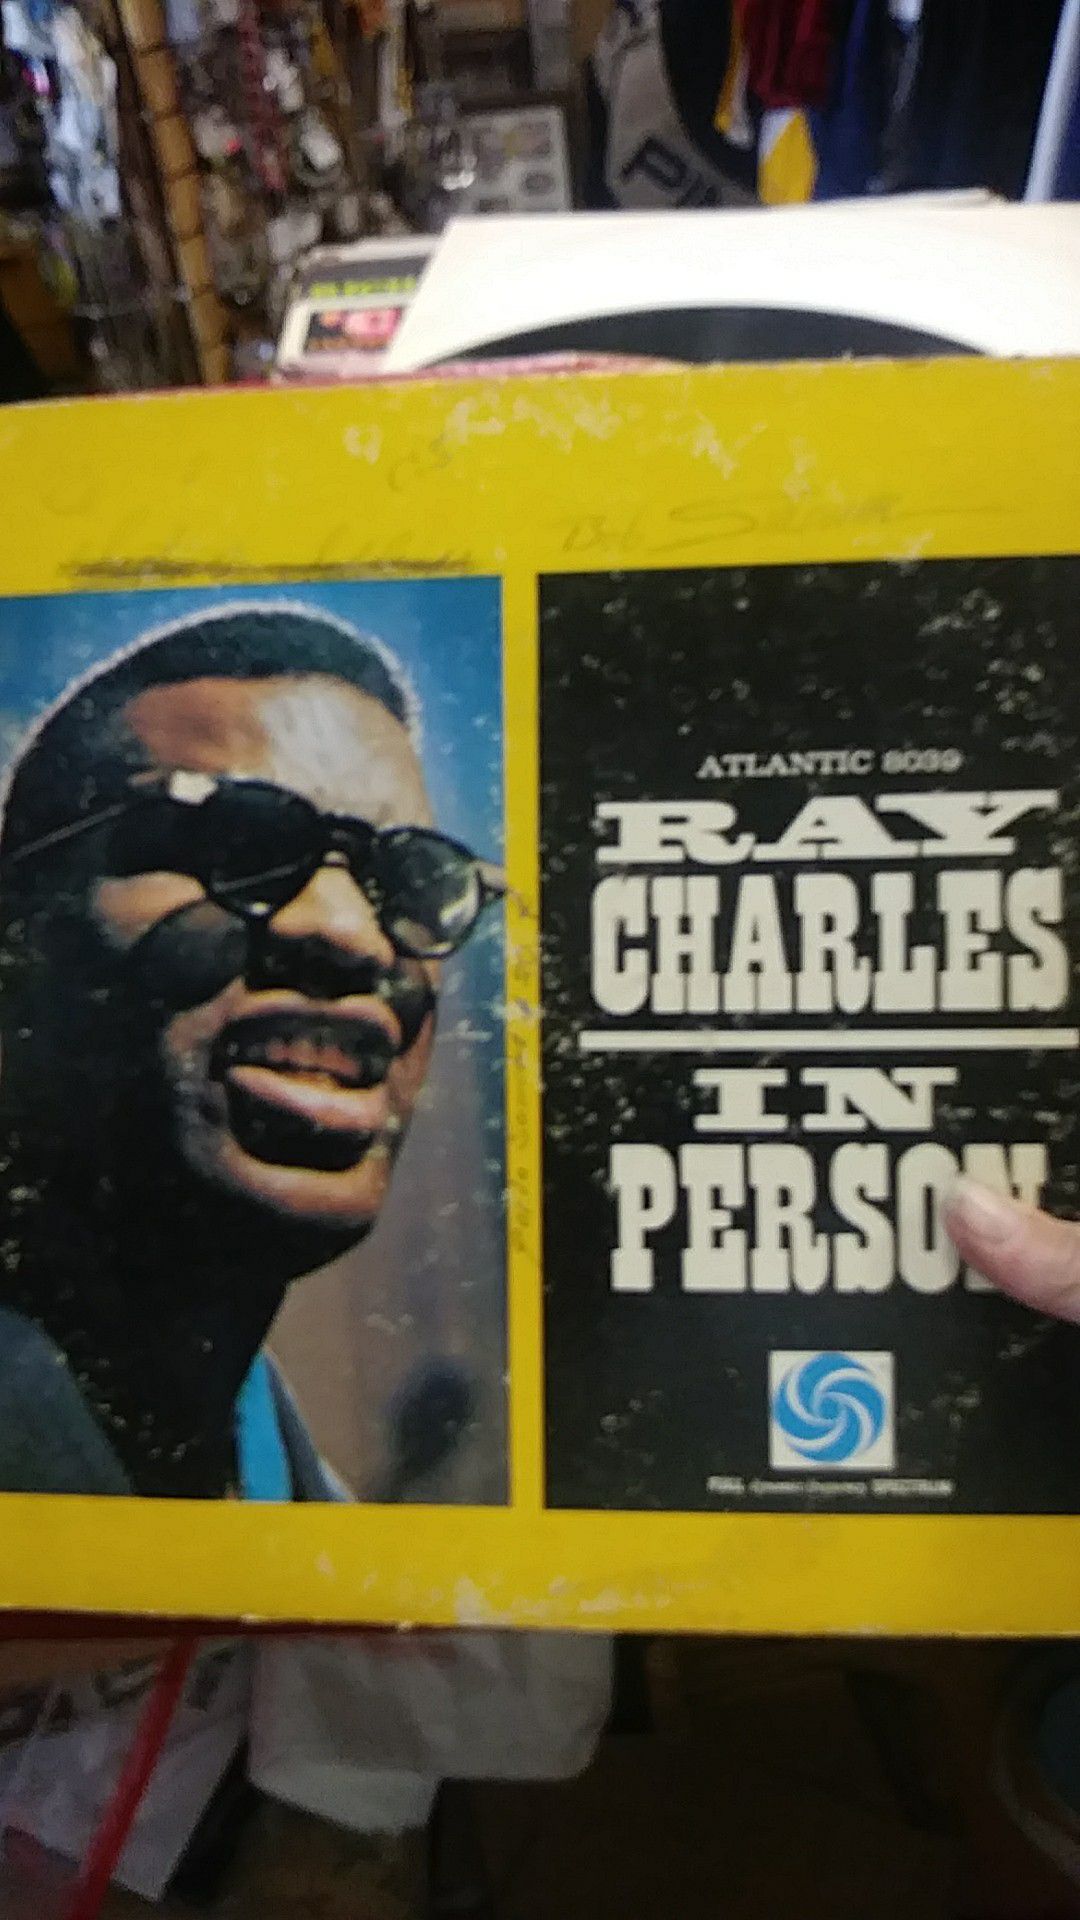 RAY CHARLES " IN PERSON ALBUM"